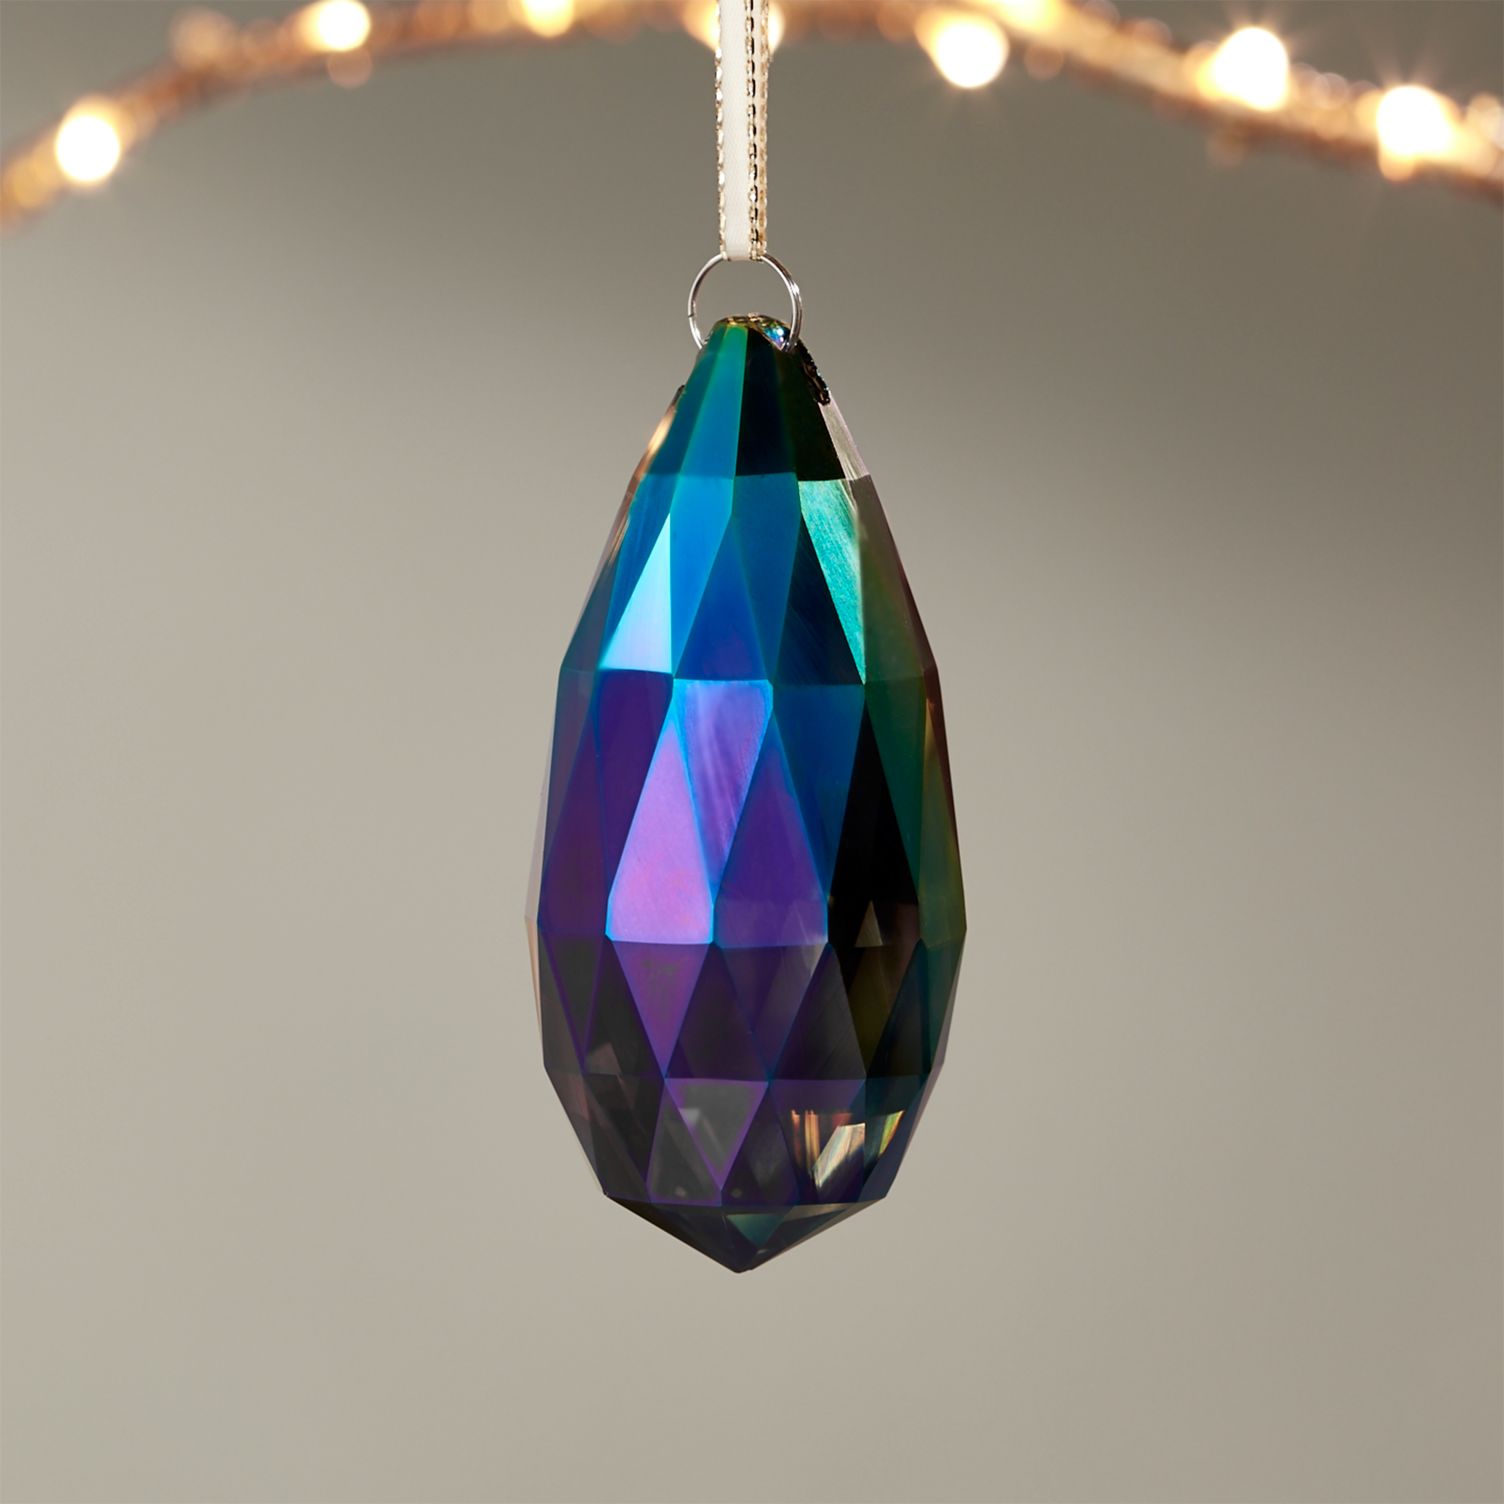 Teal jewel ornament from CB2